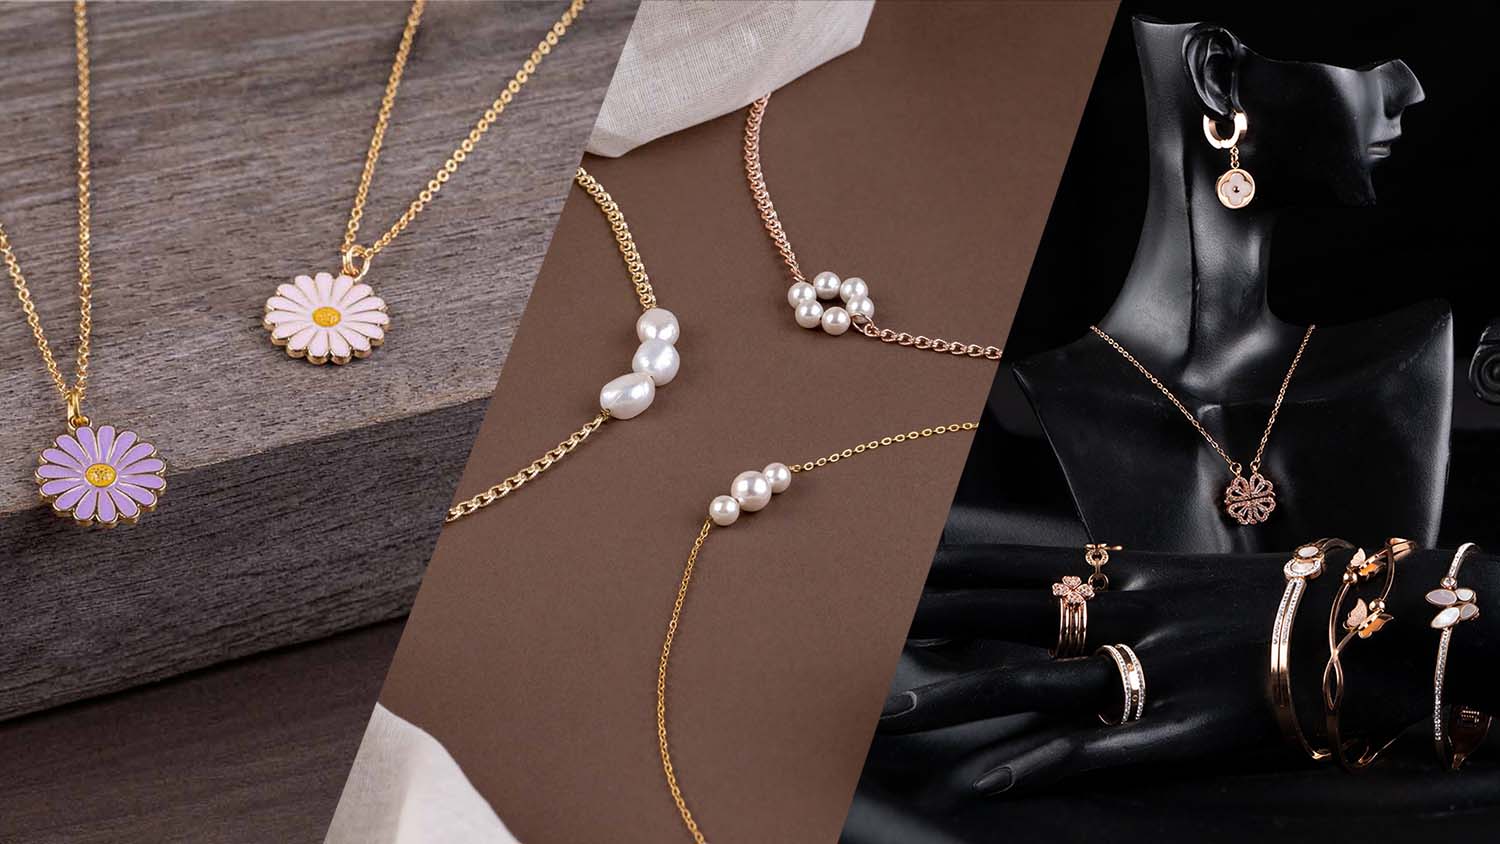 How to create a versatile jewellery collection on a budget